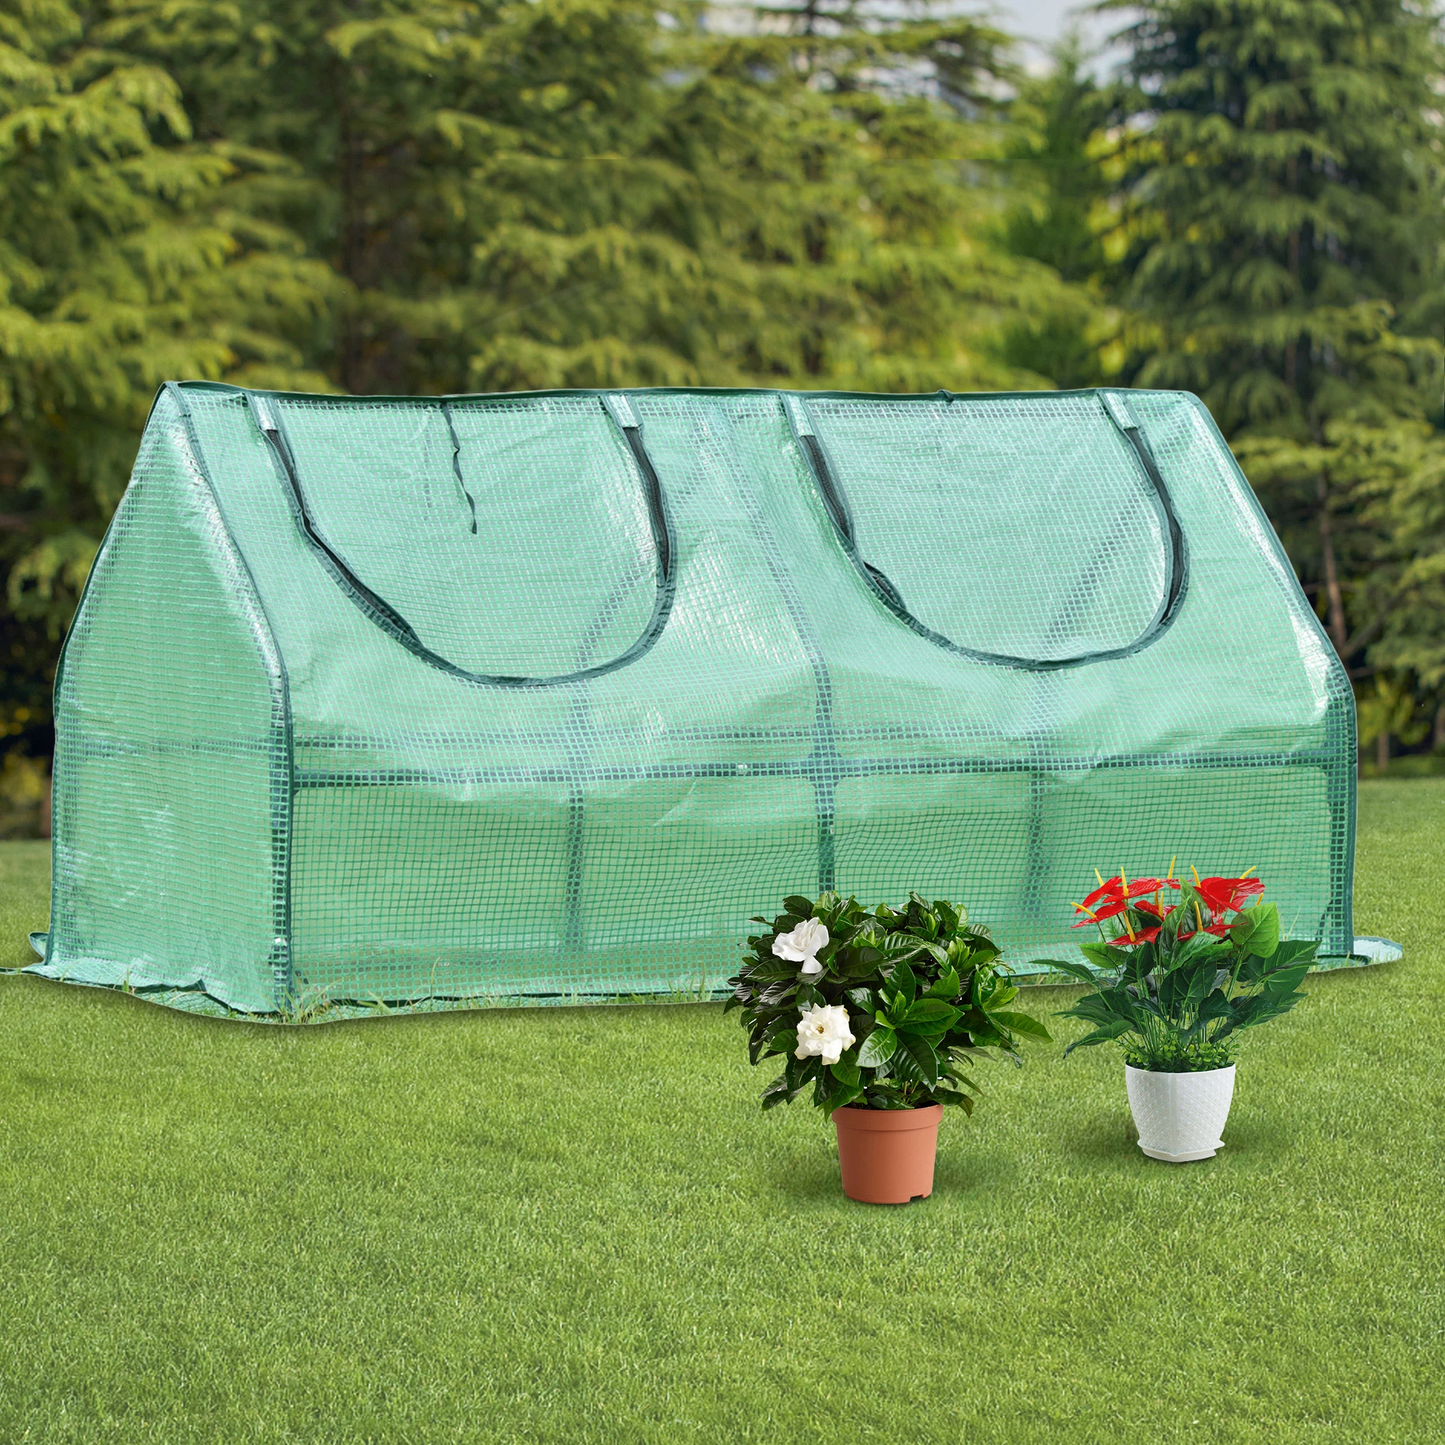 Outdoor Mini Greenhouse with Round Entrance - Protective Conservatory for Plants